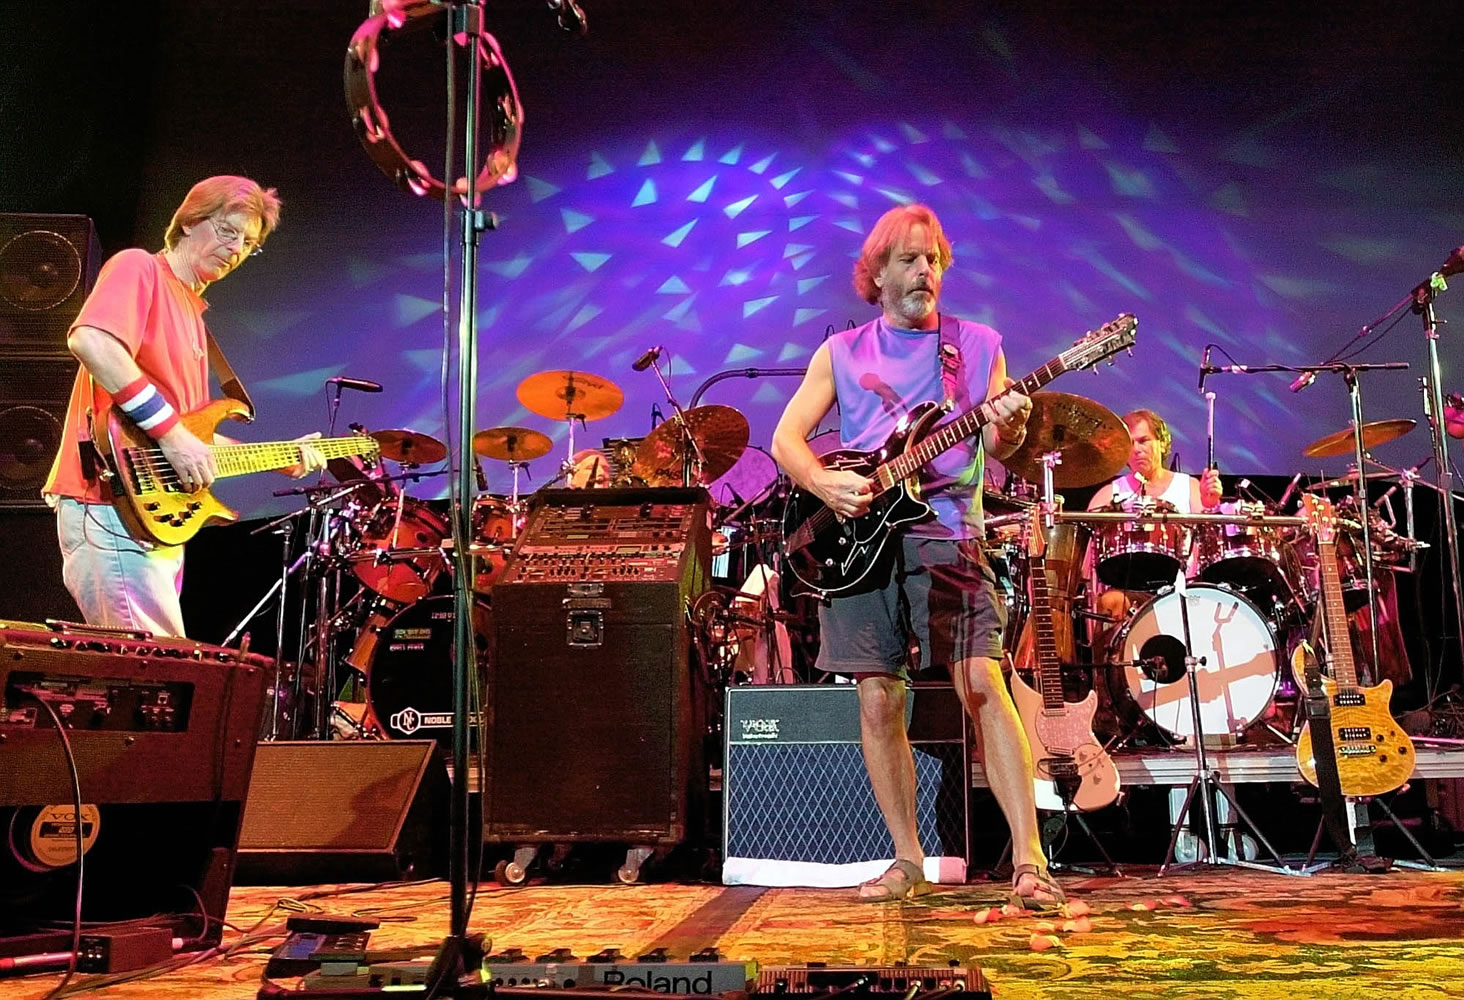 The Grateful Dead, from left, Phil Lesh, Bill Kreutzmann, Bob Weir and Mickey Hart perform Aug. 3, 2002 during a reunion concert in East Troy, Wis.